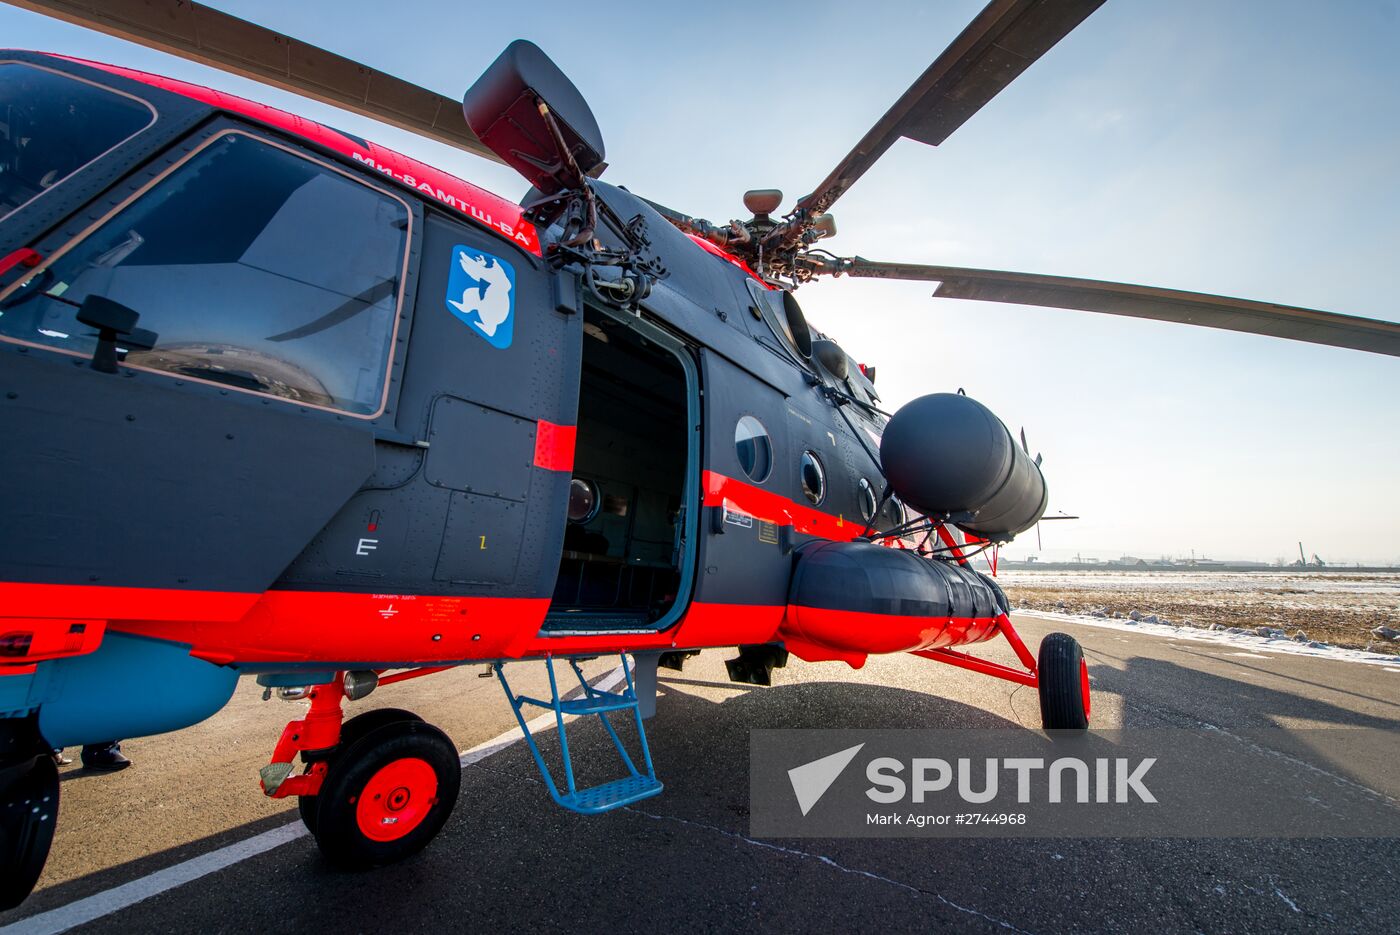 Flight tests of the Mil Mi-8AMTSH-VA Arctic helicopter at the Ulan-Ude Aviation Plant